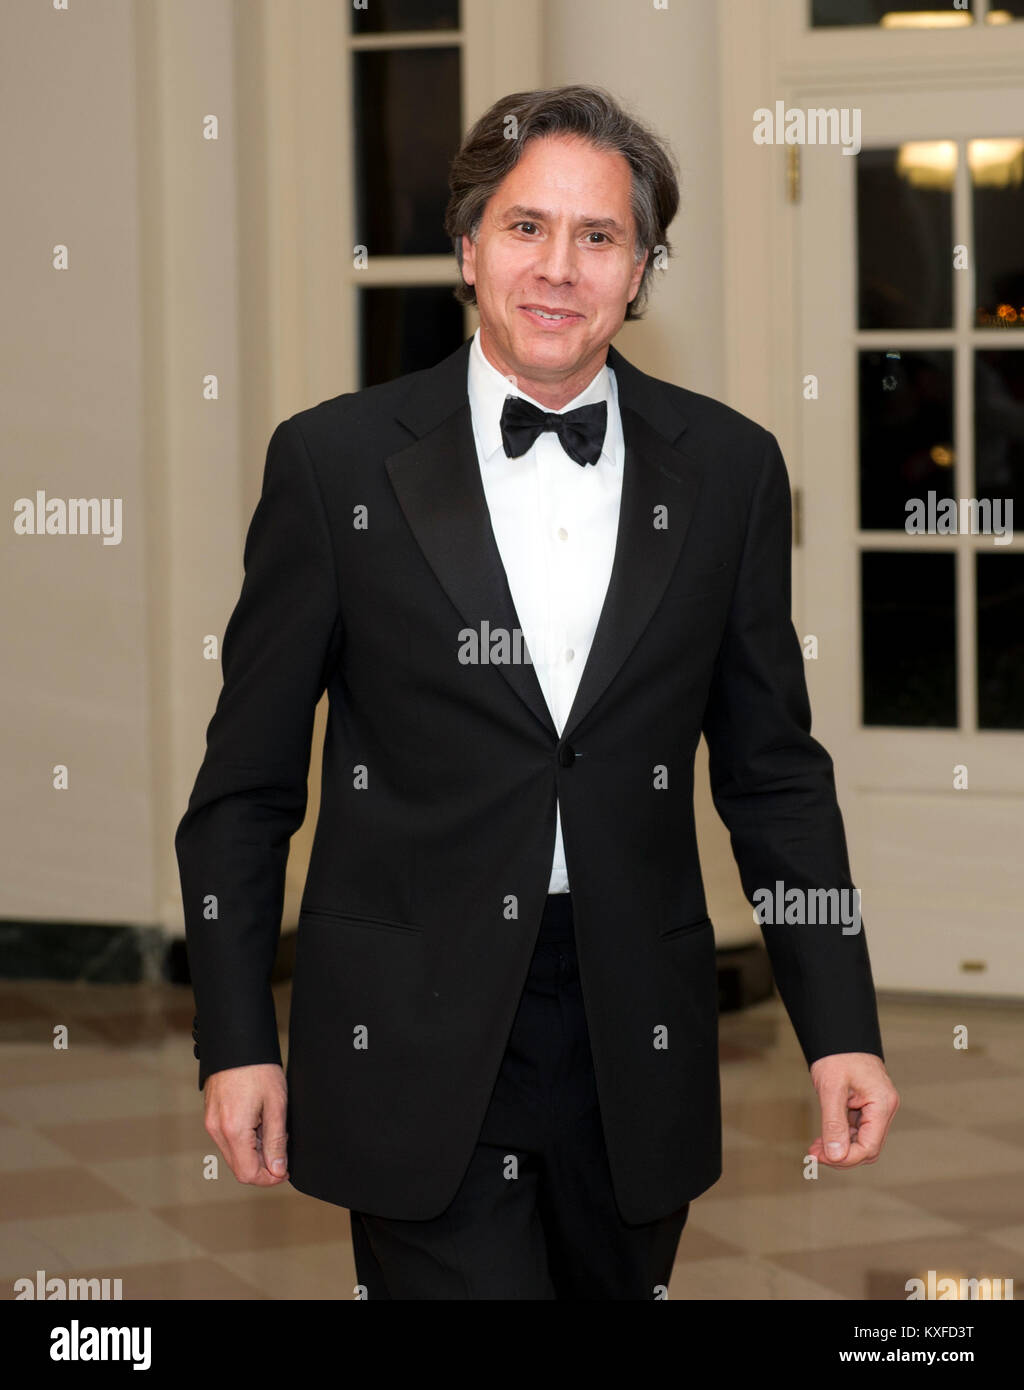 Antony Blinken, Deputy Assistant to the President and National Security Advisor, Office of the Vice President, arrives for the Official Dinner in honor of Prime Minister David Cameron of Great Britain and his wife, Samantha, at the White House in Washington, D.C. on Tuesday, March 14, 2012..Credit: Ron Sachs / CNP./ MediaPunch (RESTRICTION: NO New York or New Jersey Newspapers or newspapers within a 75 mile radius of New York City) Stock Photo